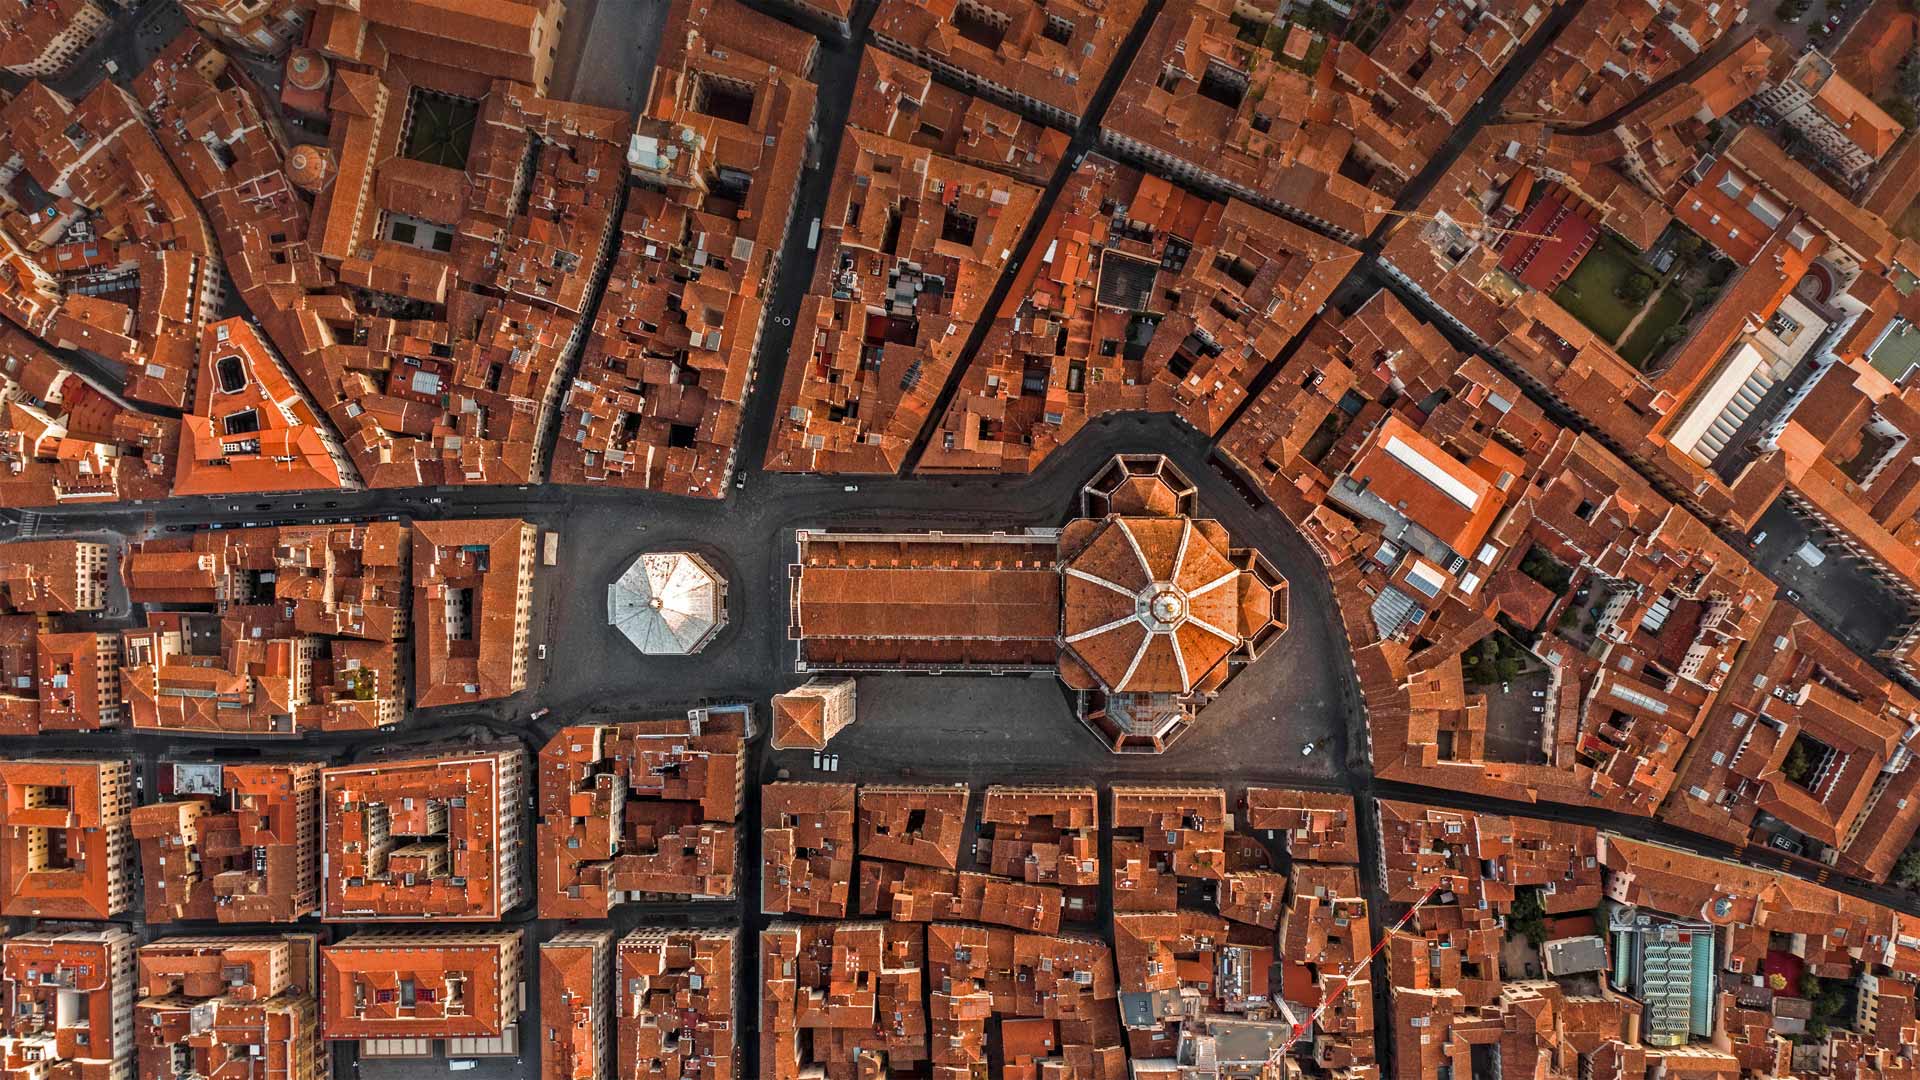 The Cathedral of Florence, Italy - Alexander Baert/Amazing Aerial Agency)